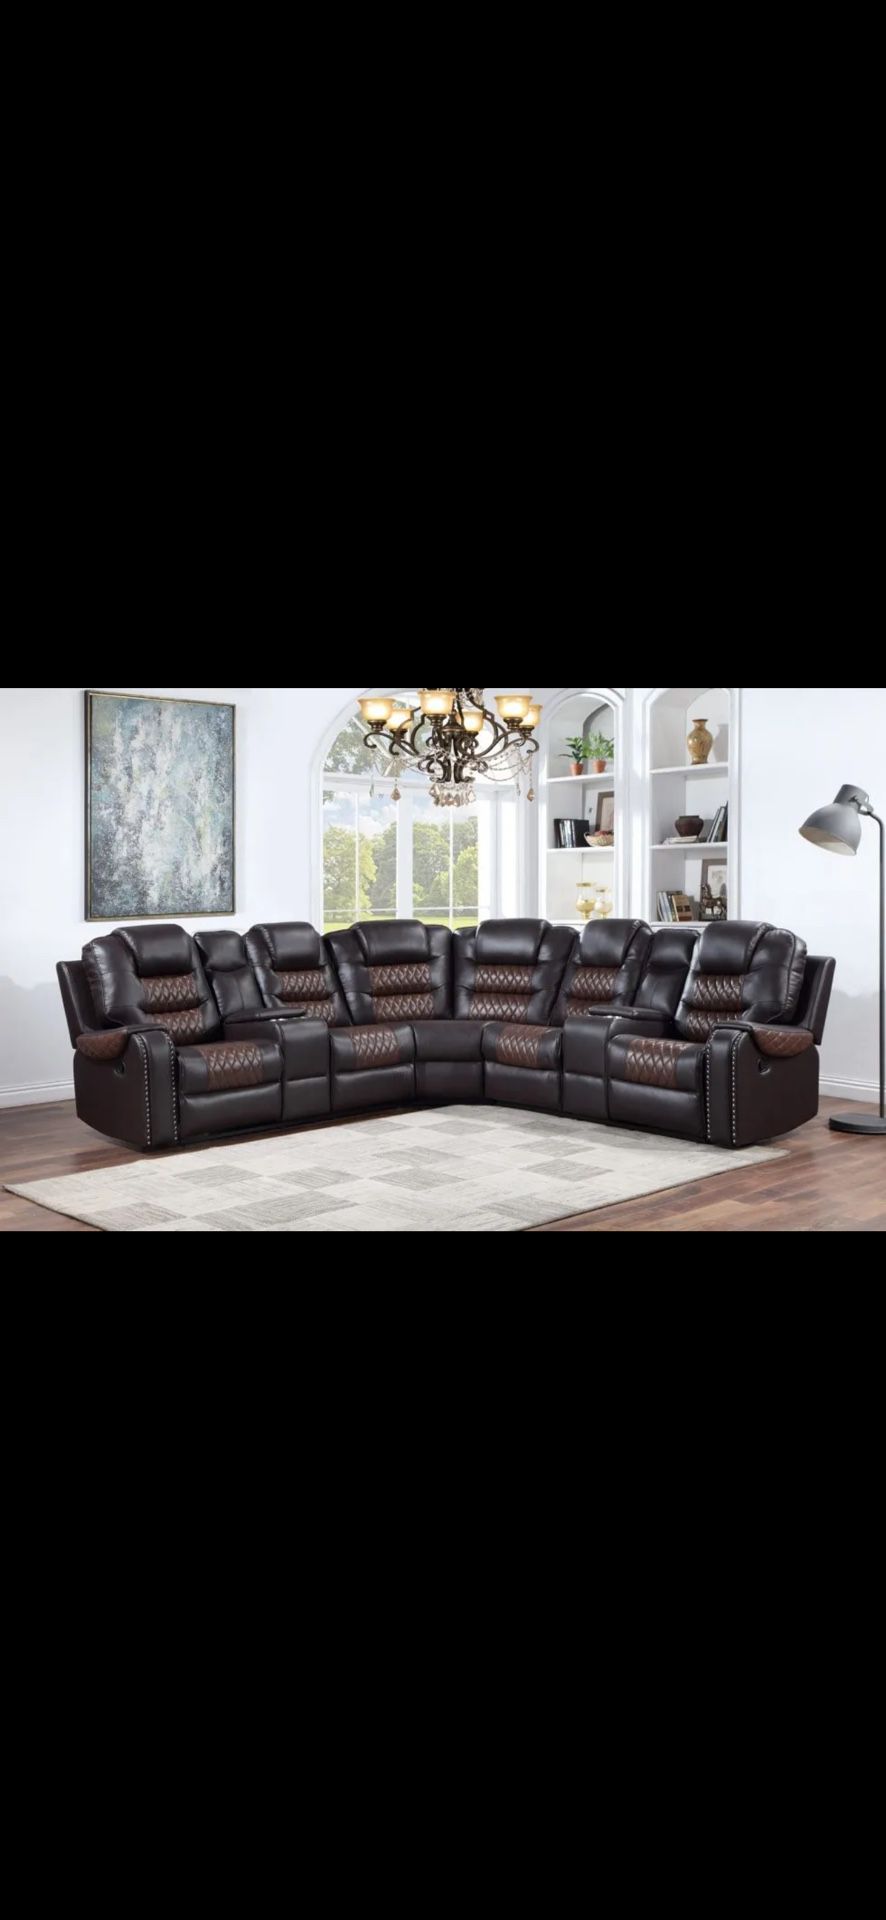 Brand New Modern Leather Sectional For $1249